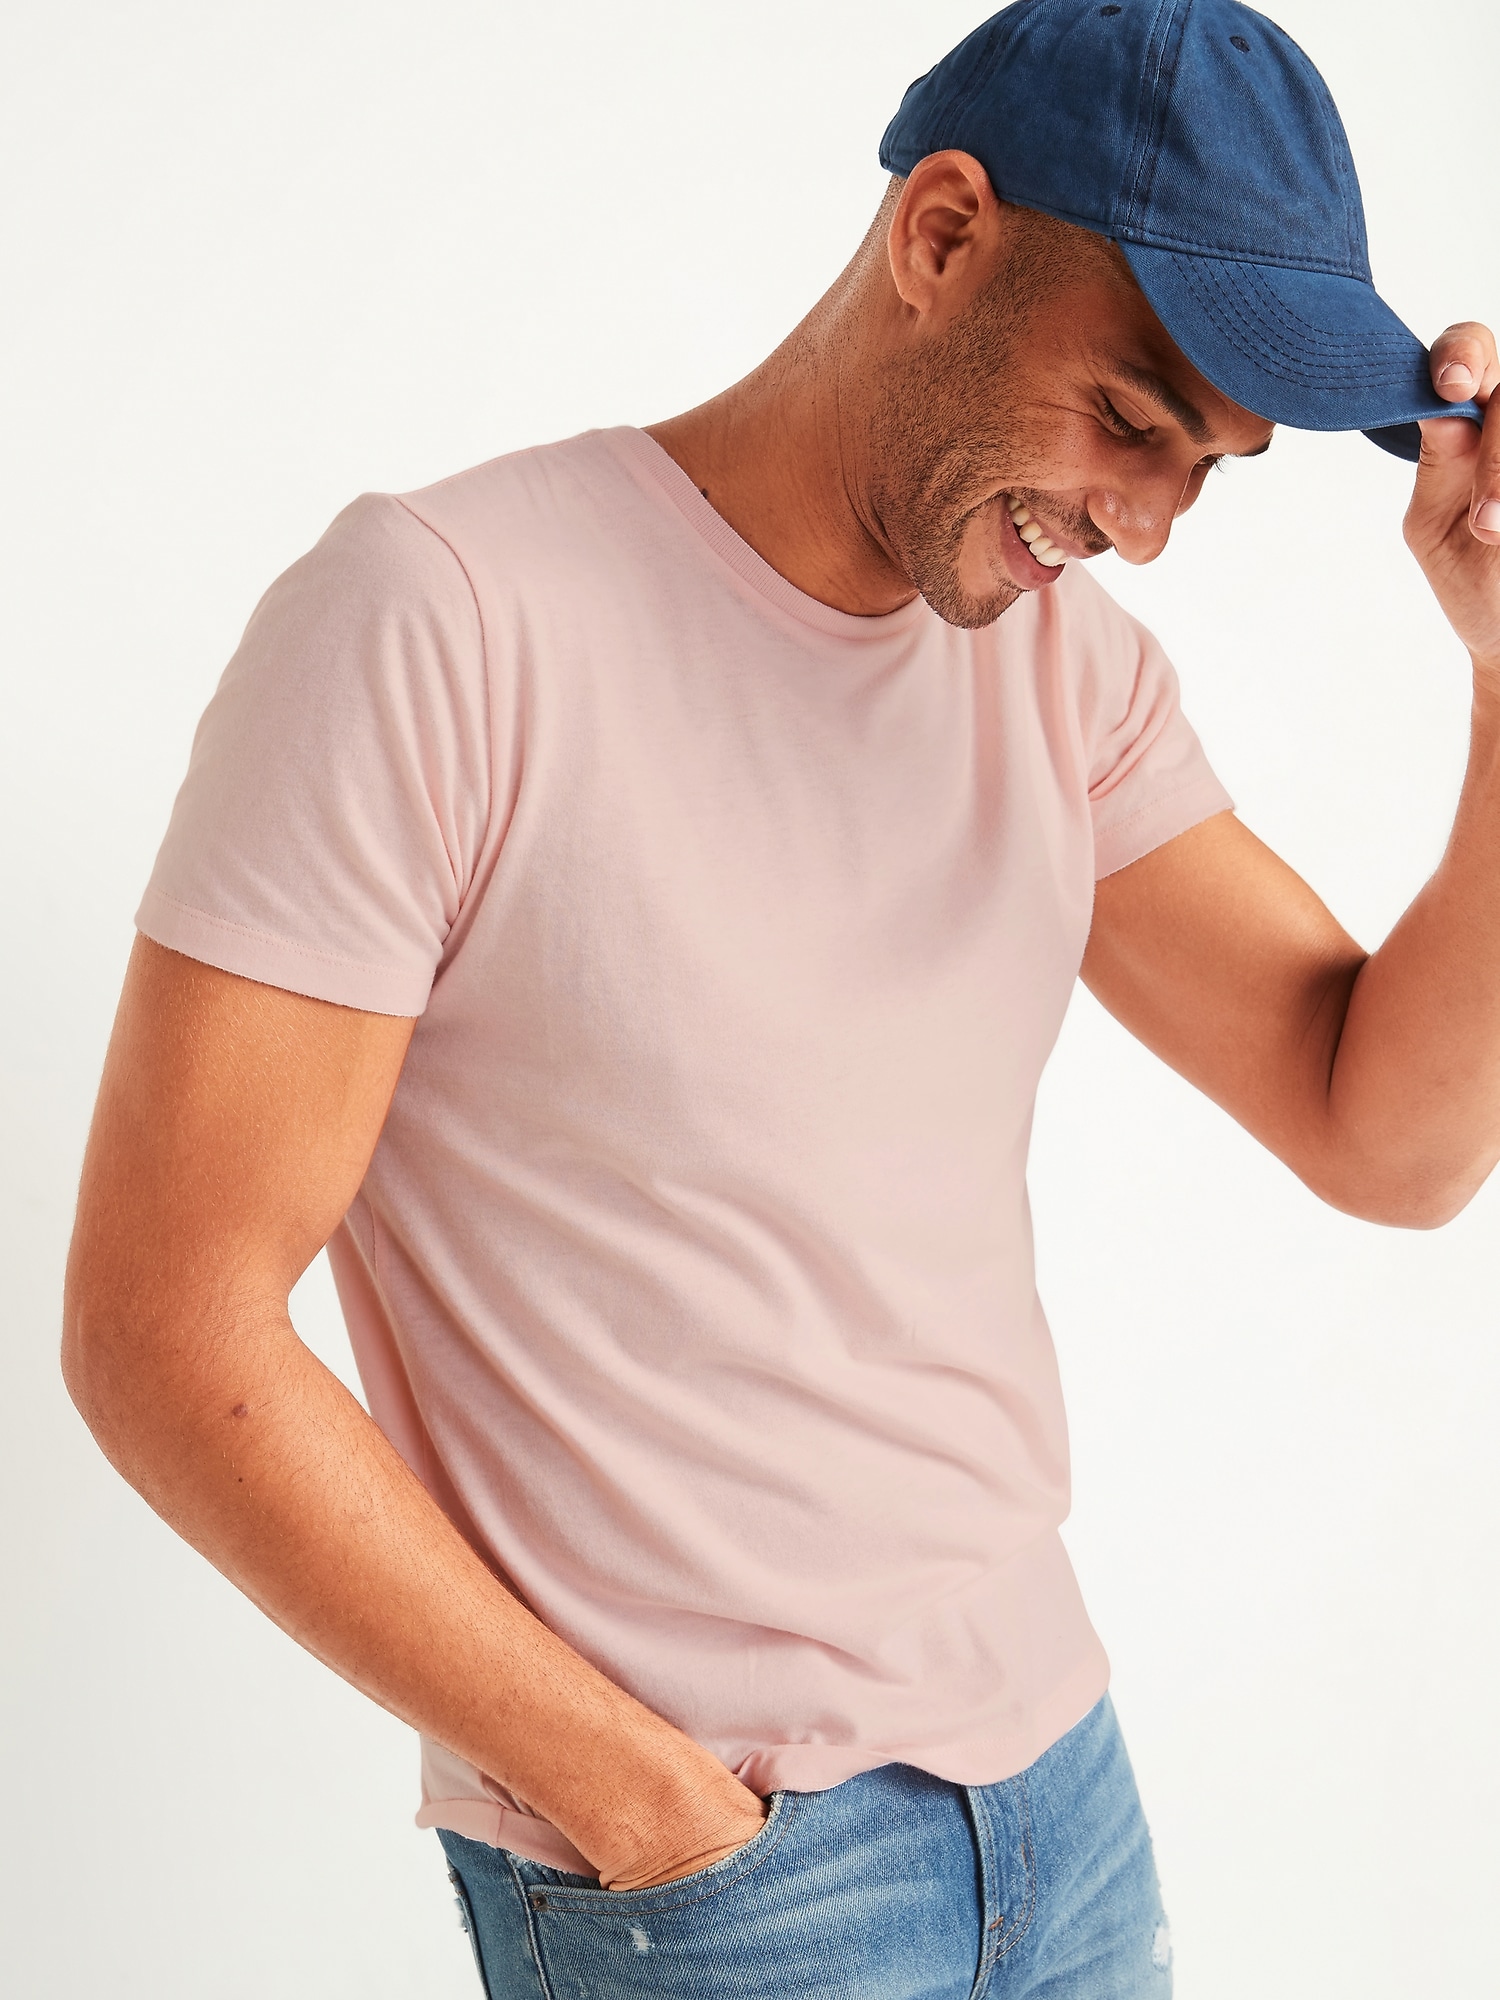 Soft-Washed Crew-Neck Short-Sleeve Tee for Men